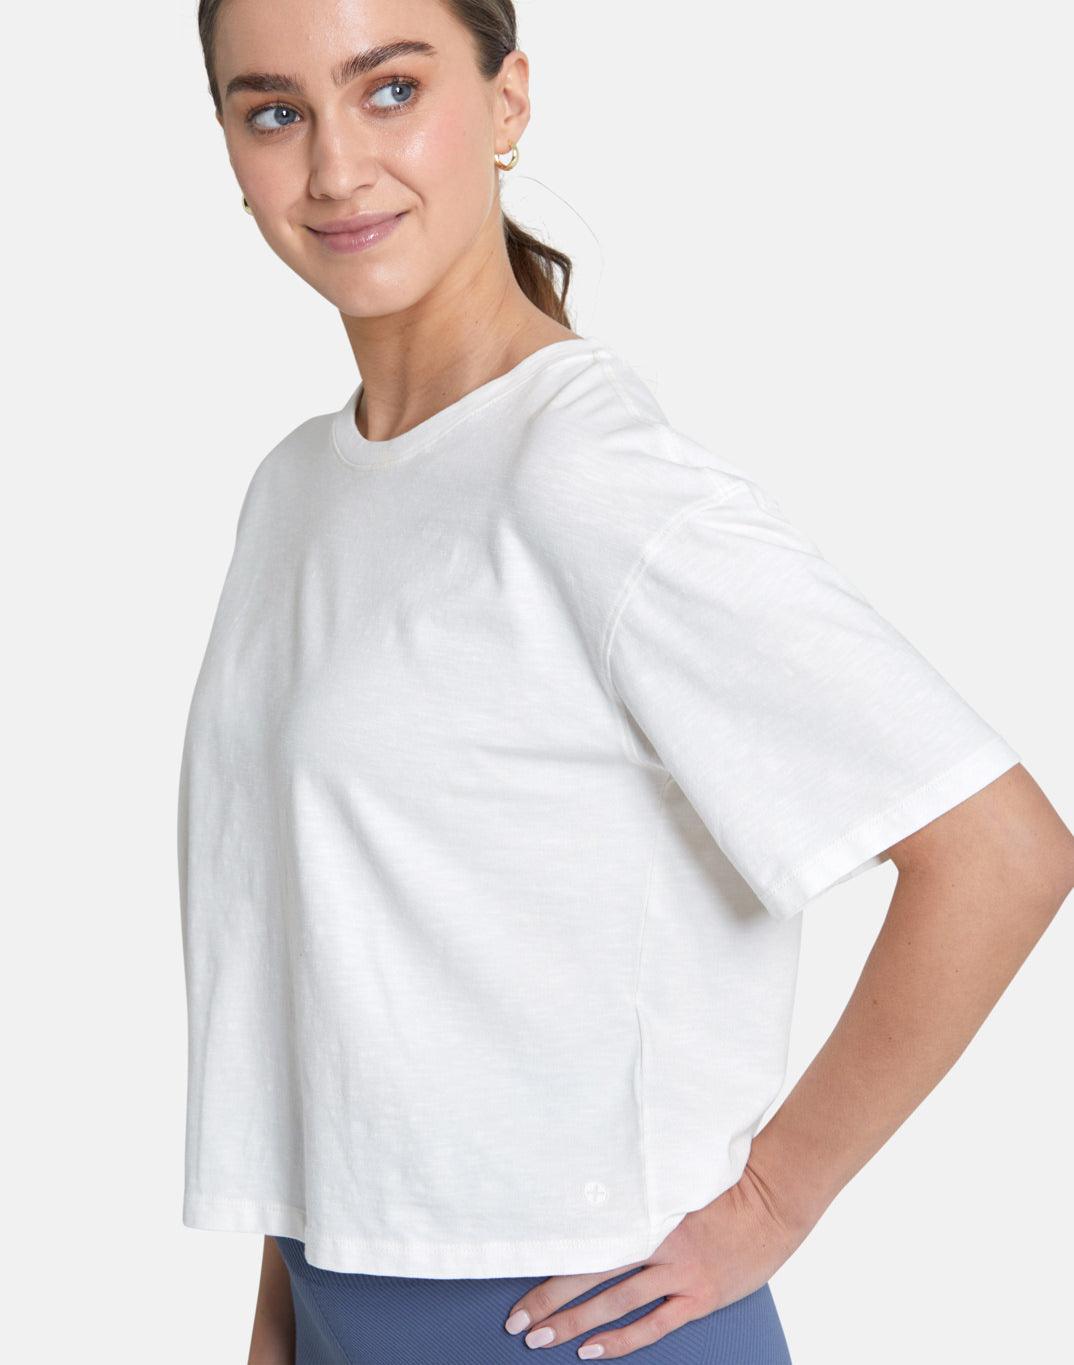 Essential Crop Tee in Ivory White - T-Shirts - Gym+Coffee